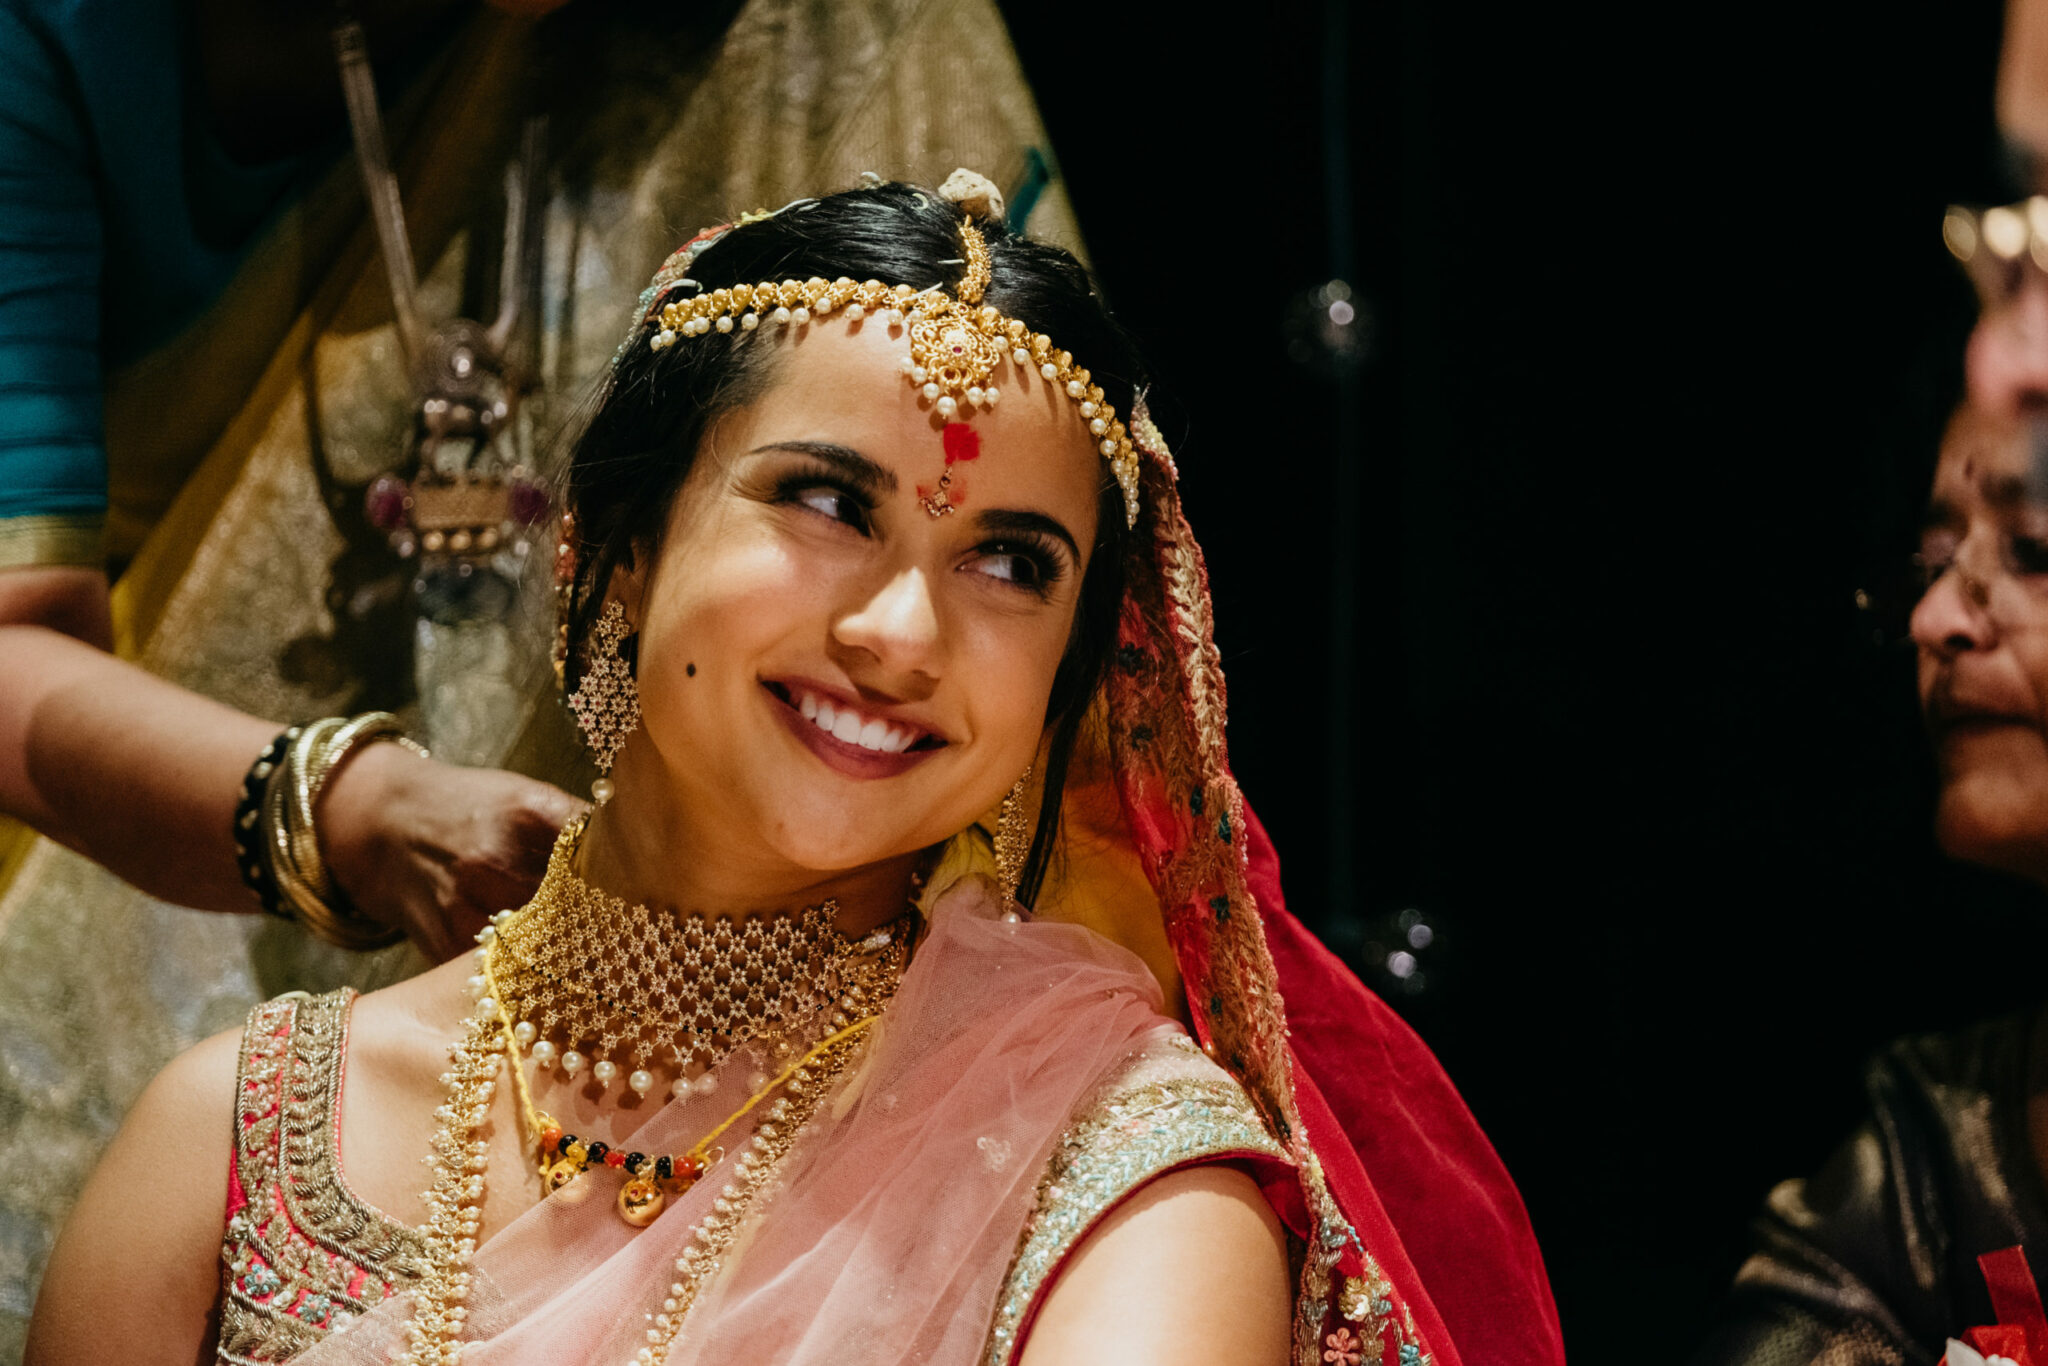 Aria & Joseph's Hindu infused Gem Theatre Detroit wedding was nothing short of amazing. From the colors, the details, their personalities and even the love surrounding them made the day magnificent.